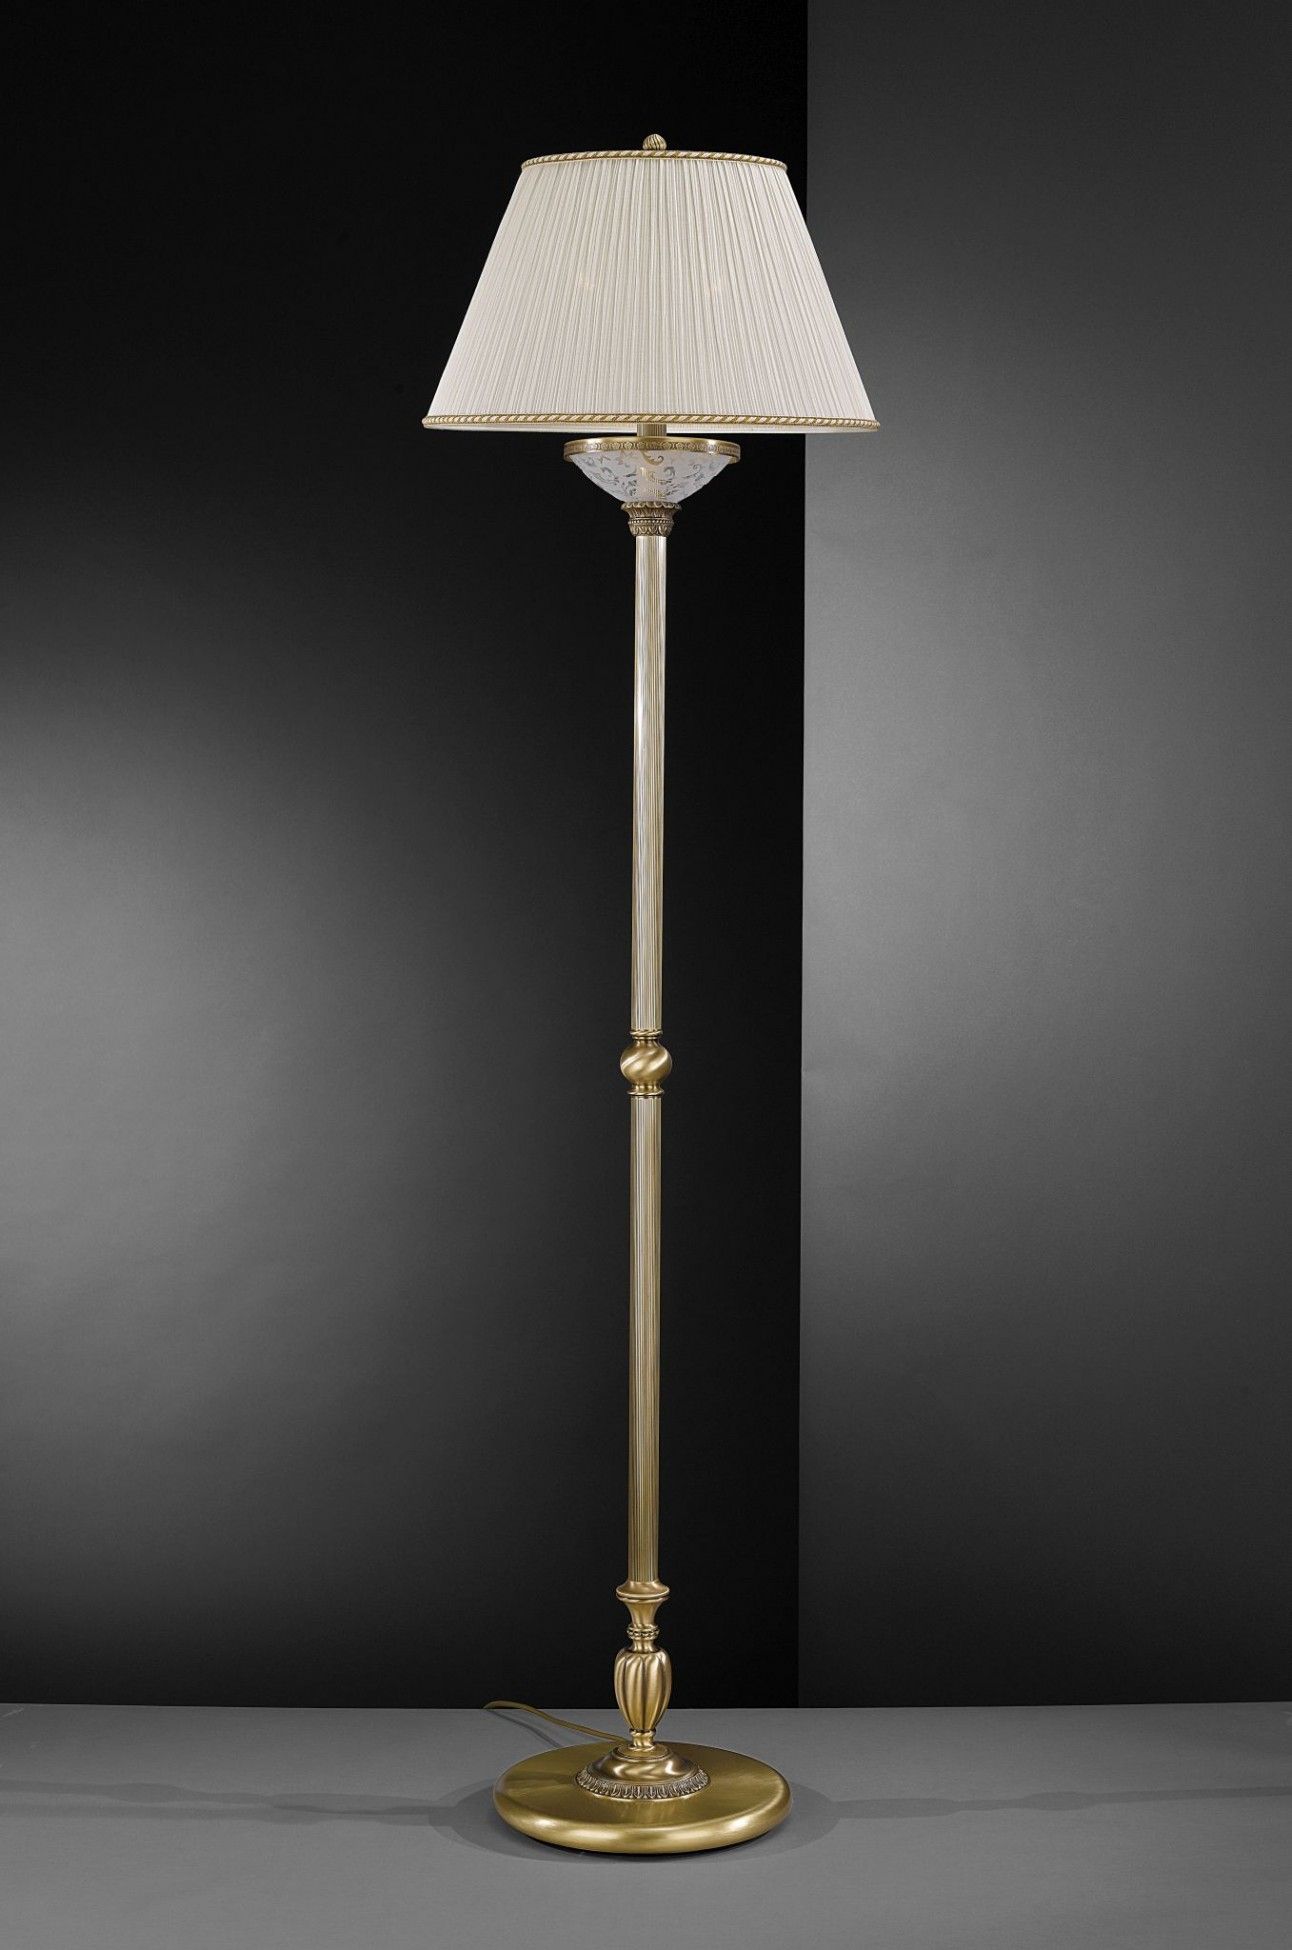 Brass Floor Lamp With Decorated Frosted Glass And Fabric Shade | Reccagni  Store Pertaining To Frosted Glass Floor Lamps (View 7 of 15)